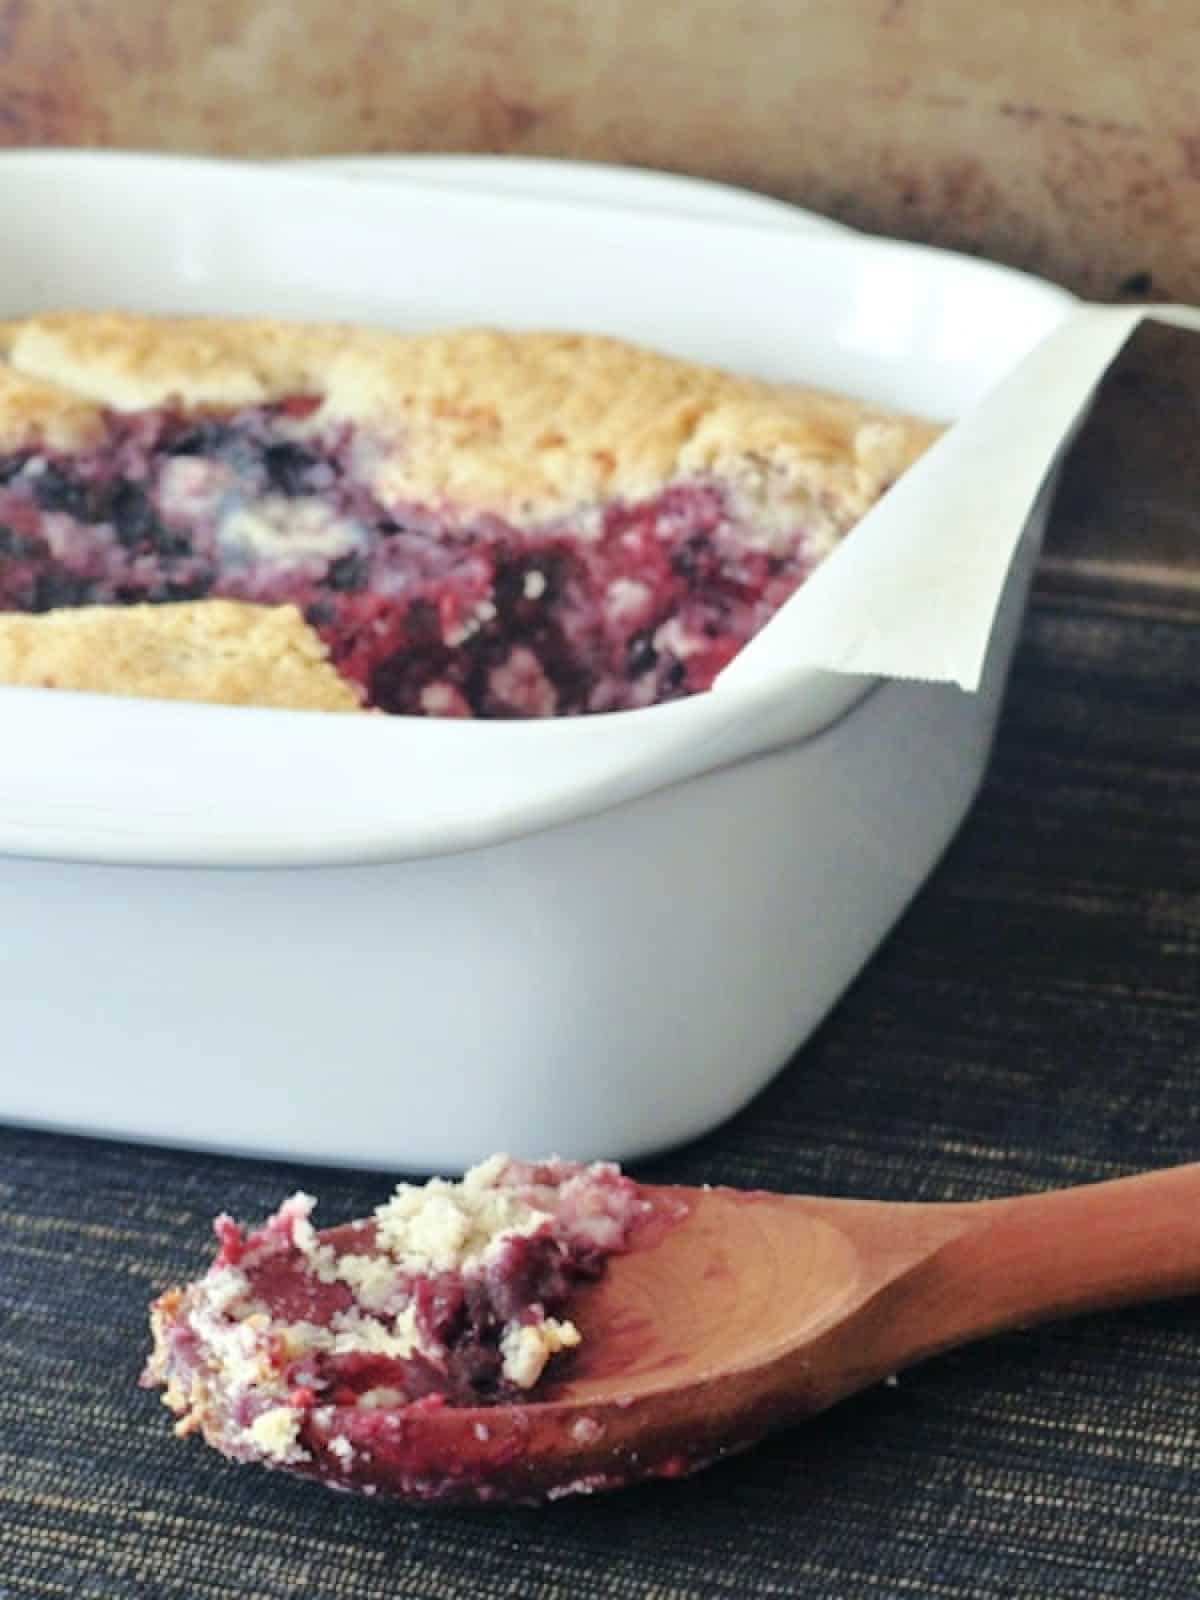 White square baking dish of mixed berry cobbler with a wooden spoon next to it with cobbler on the spoon.